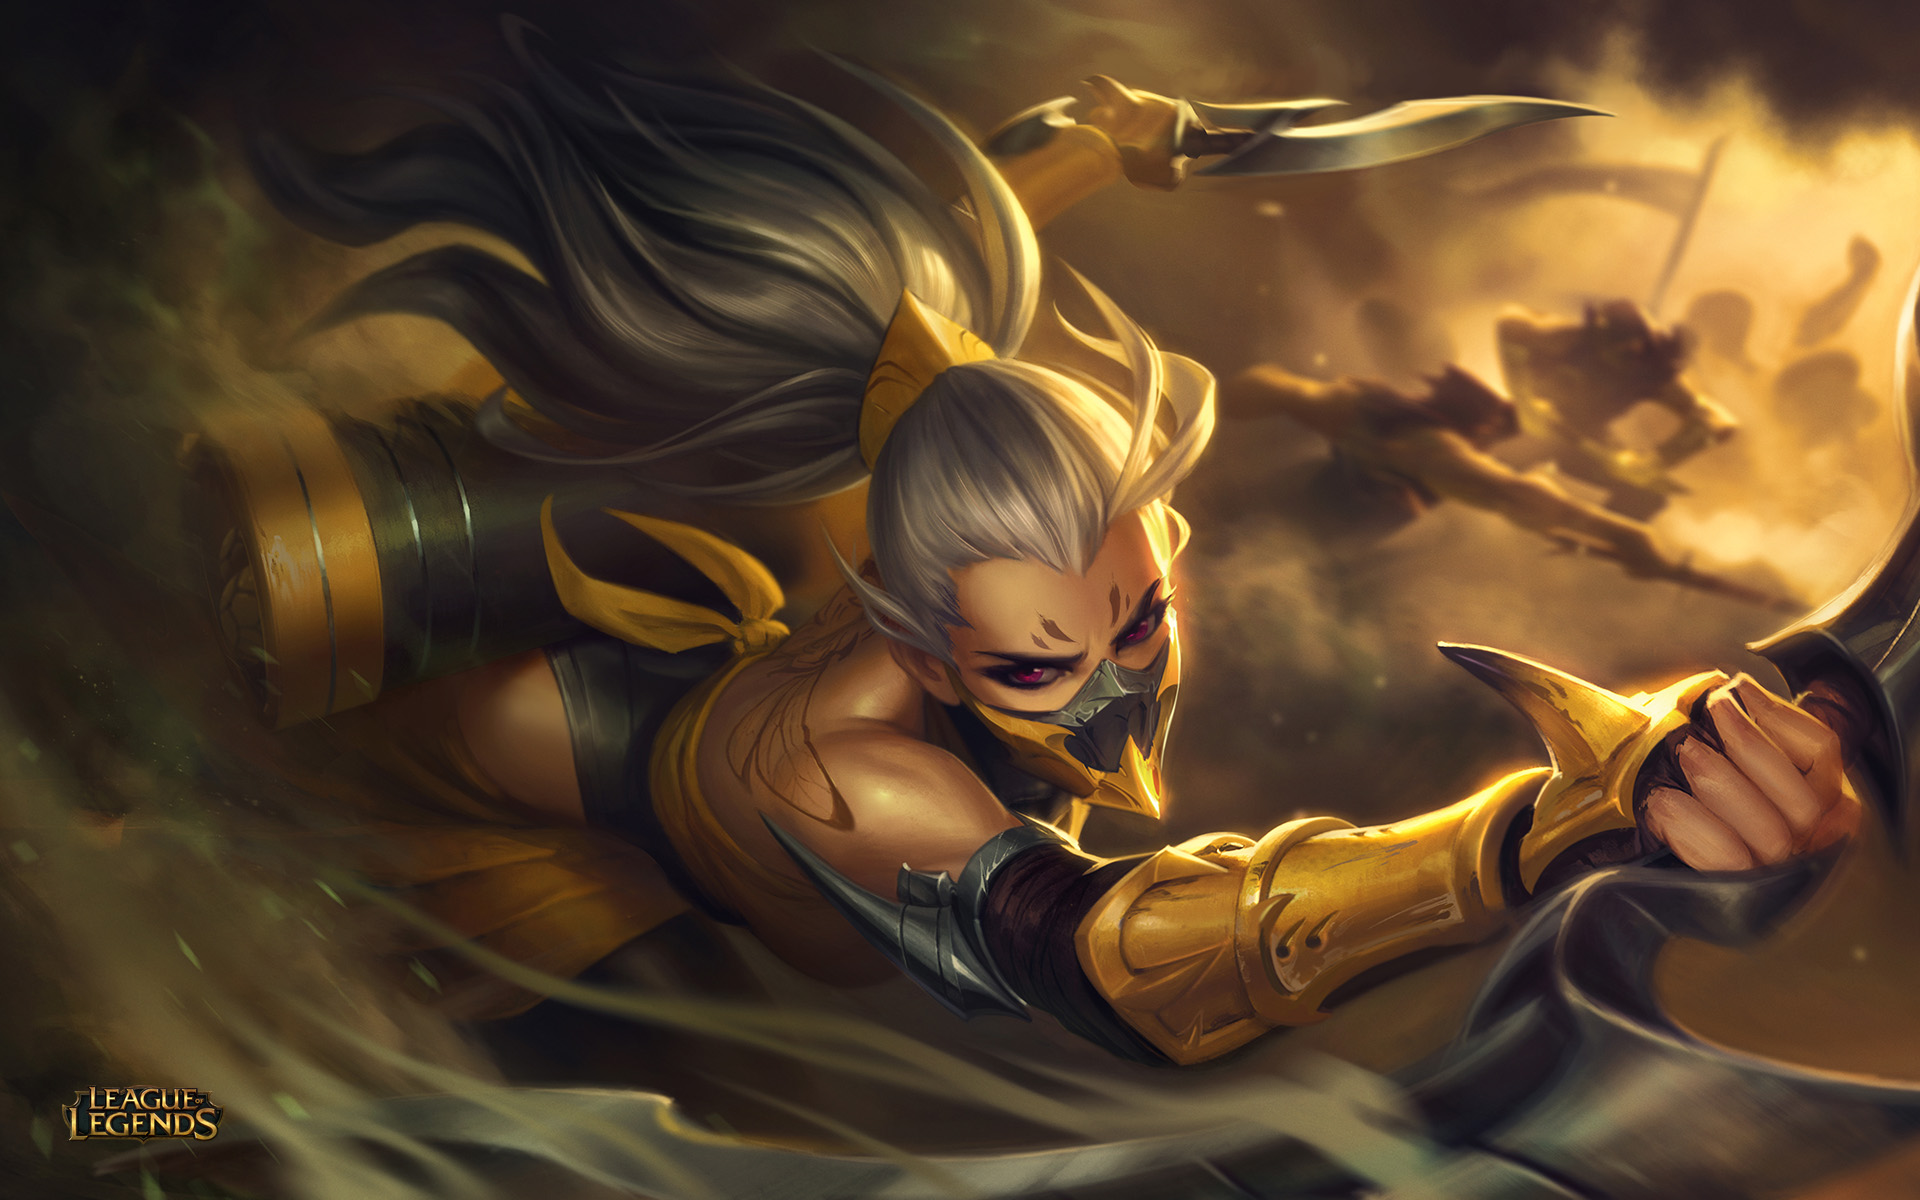 General 1920x1200 League of Legends Akali (League of Legends) video games Riot Games video game characters title Summoner's Rift weapon dual wield long hair ponytail